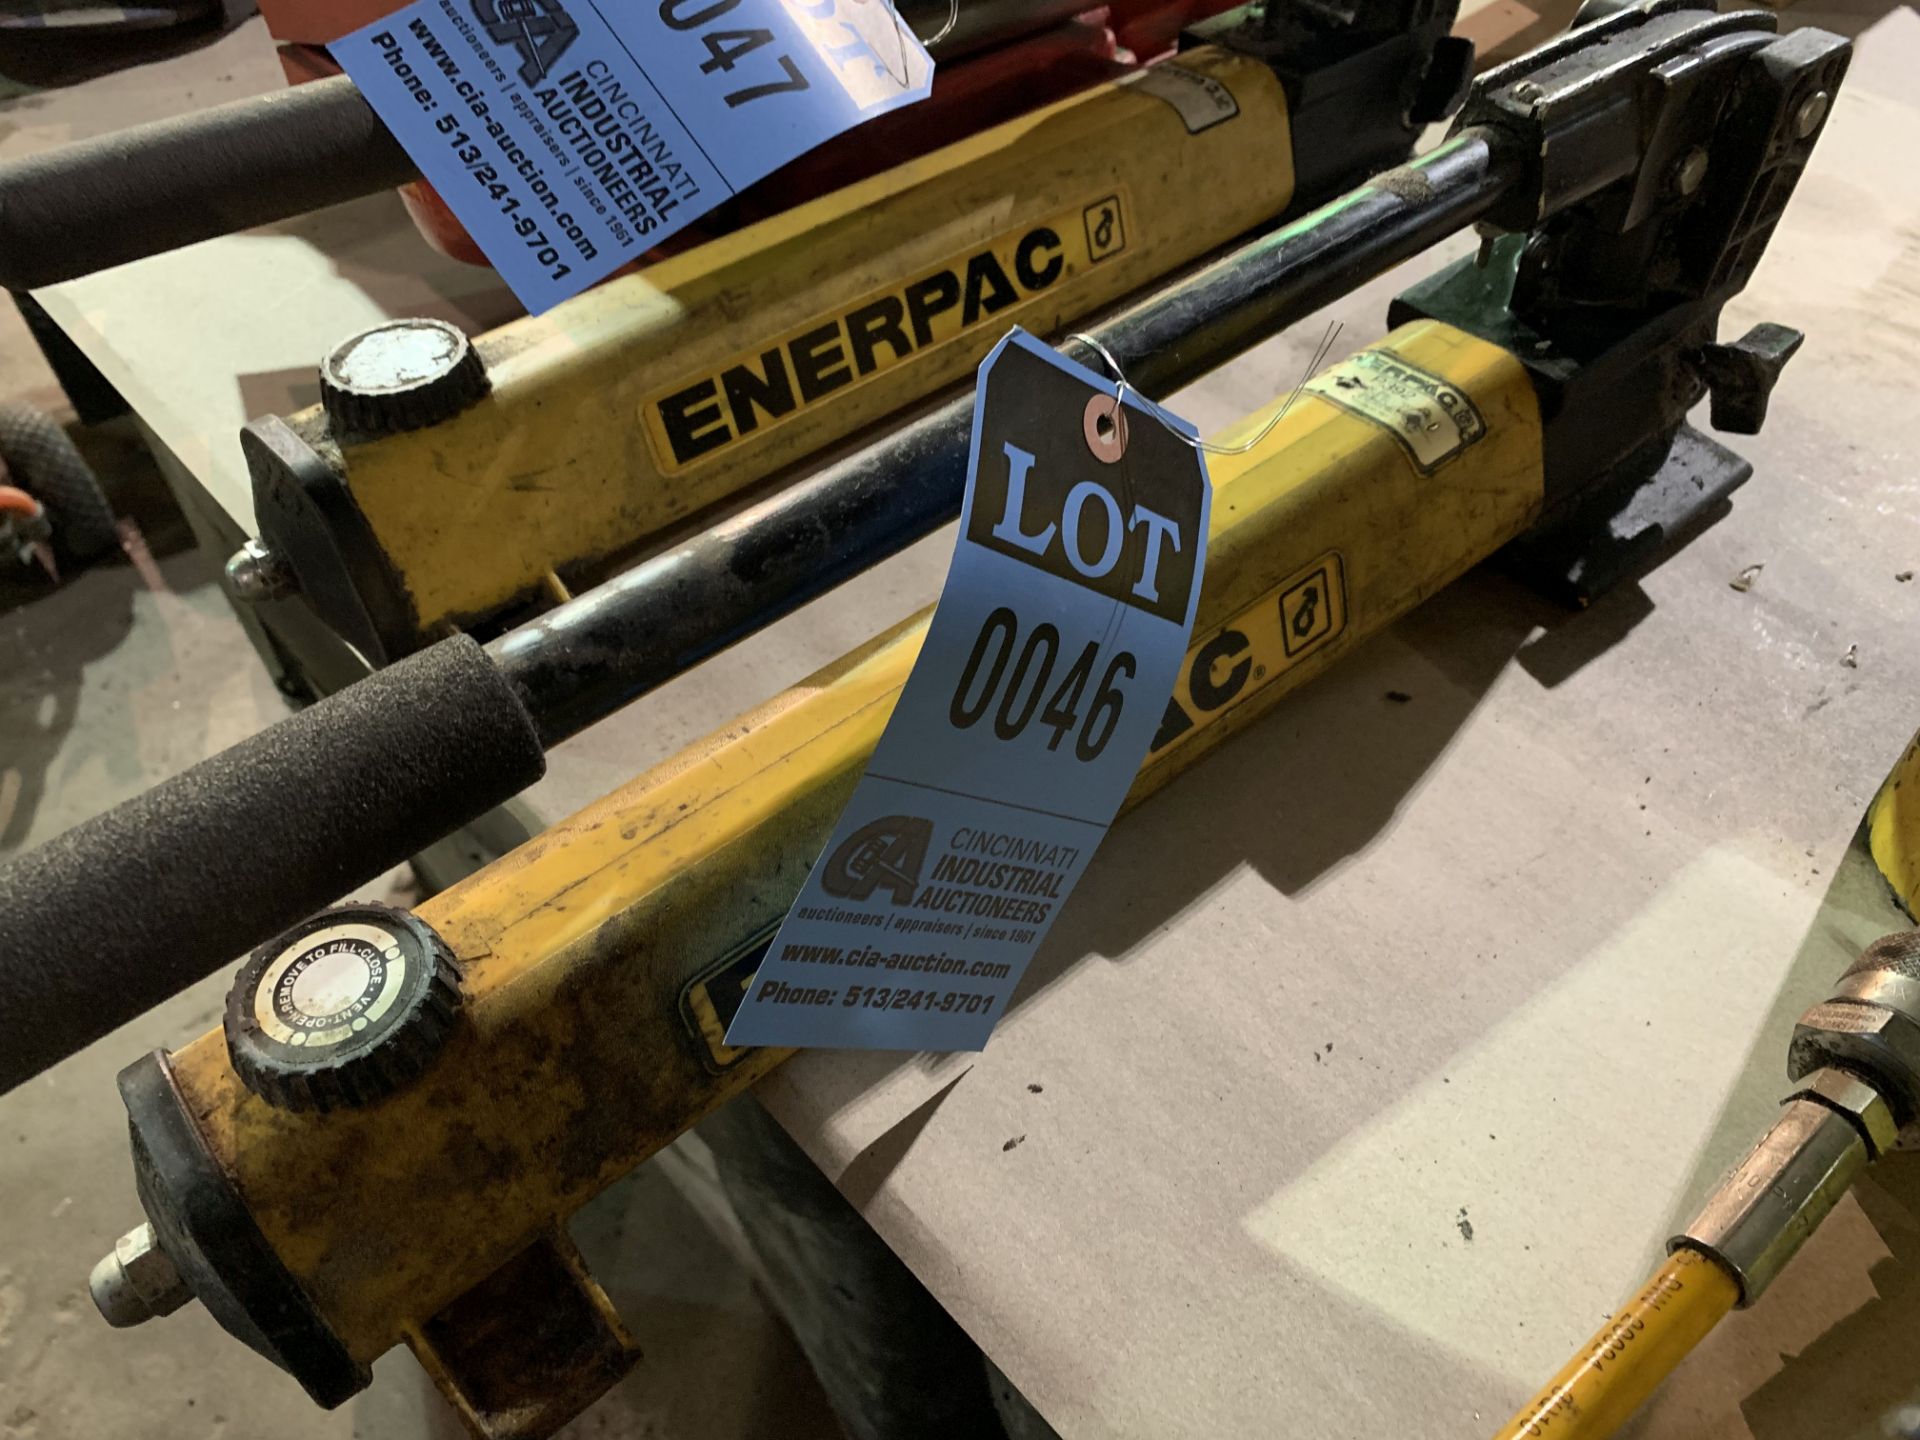 ENERPAC P392 HAND PUMP **LOCATED AT 111 W. WESTCOTT WAY**